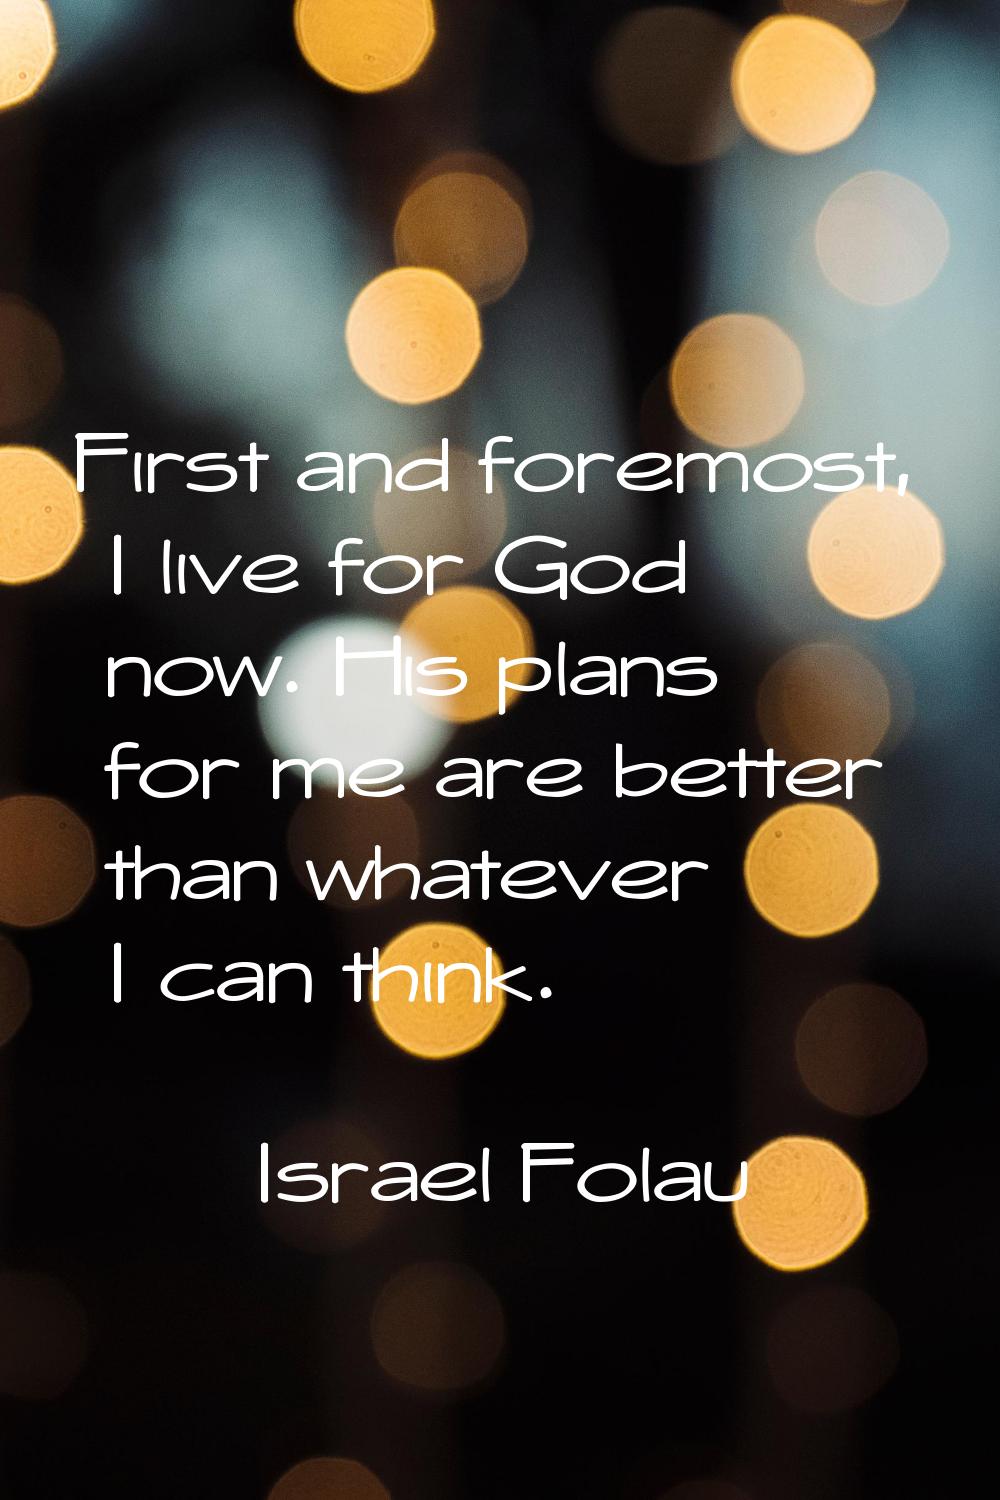 First and foremost, I live for God now. His plans for me are better than whatever I can think.